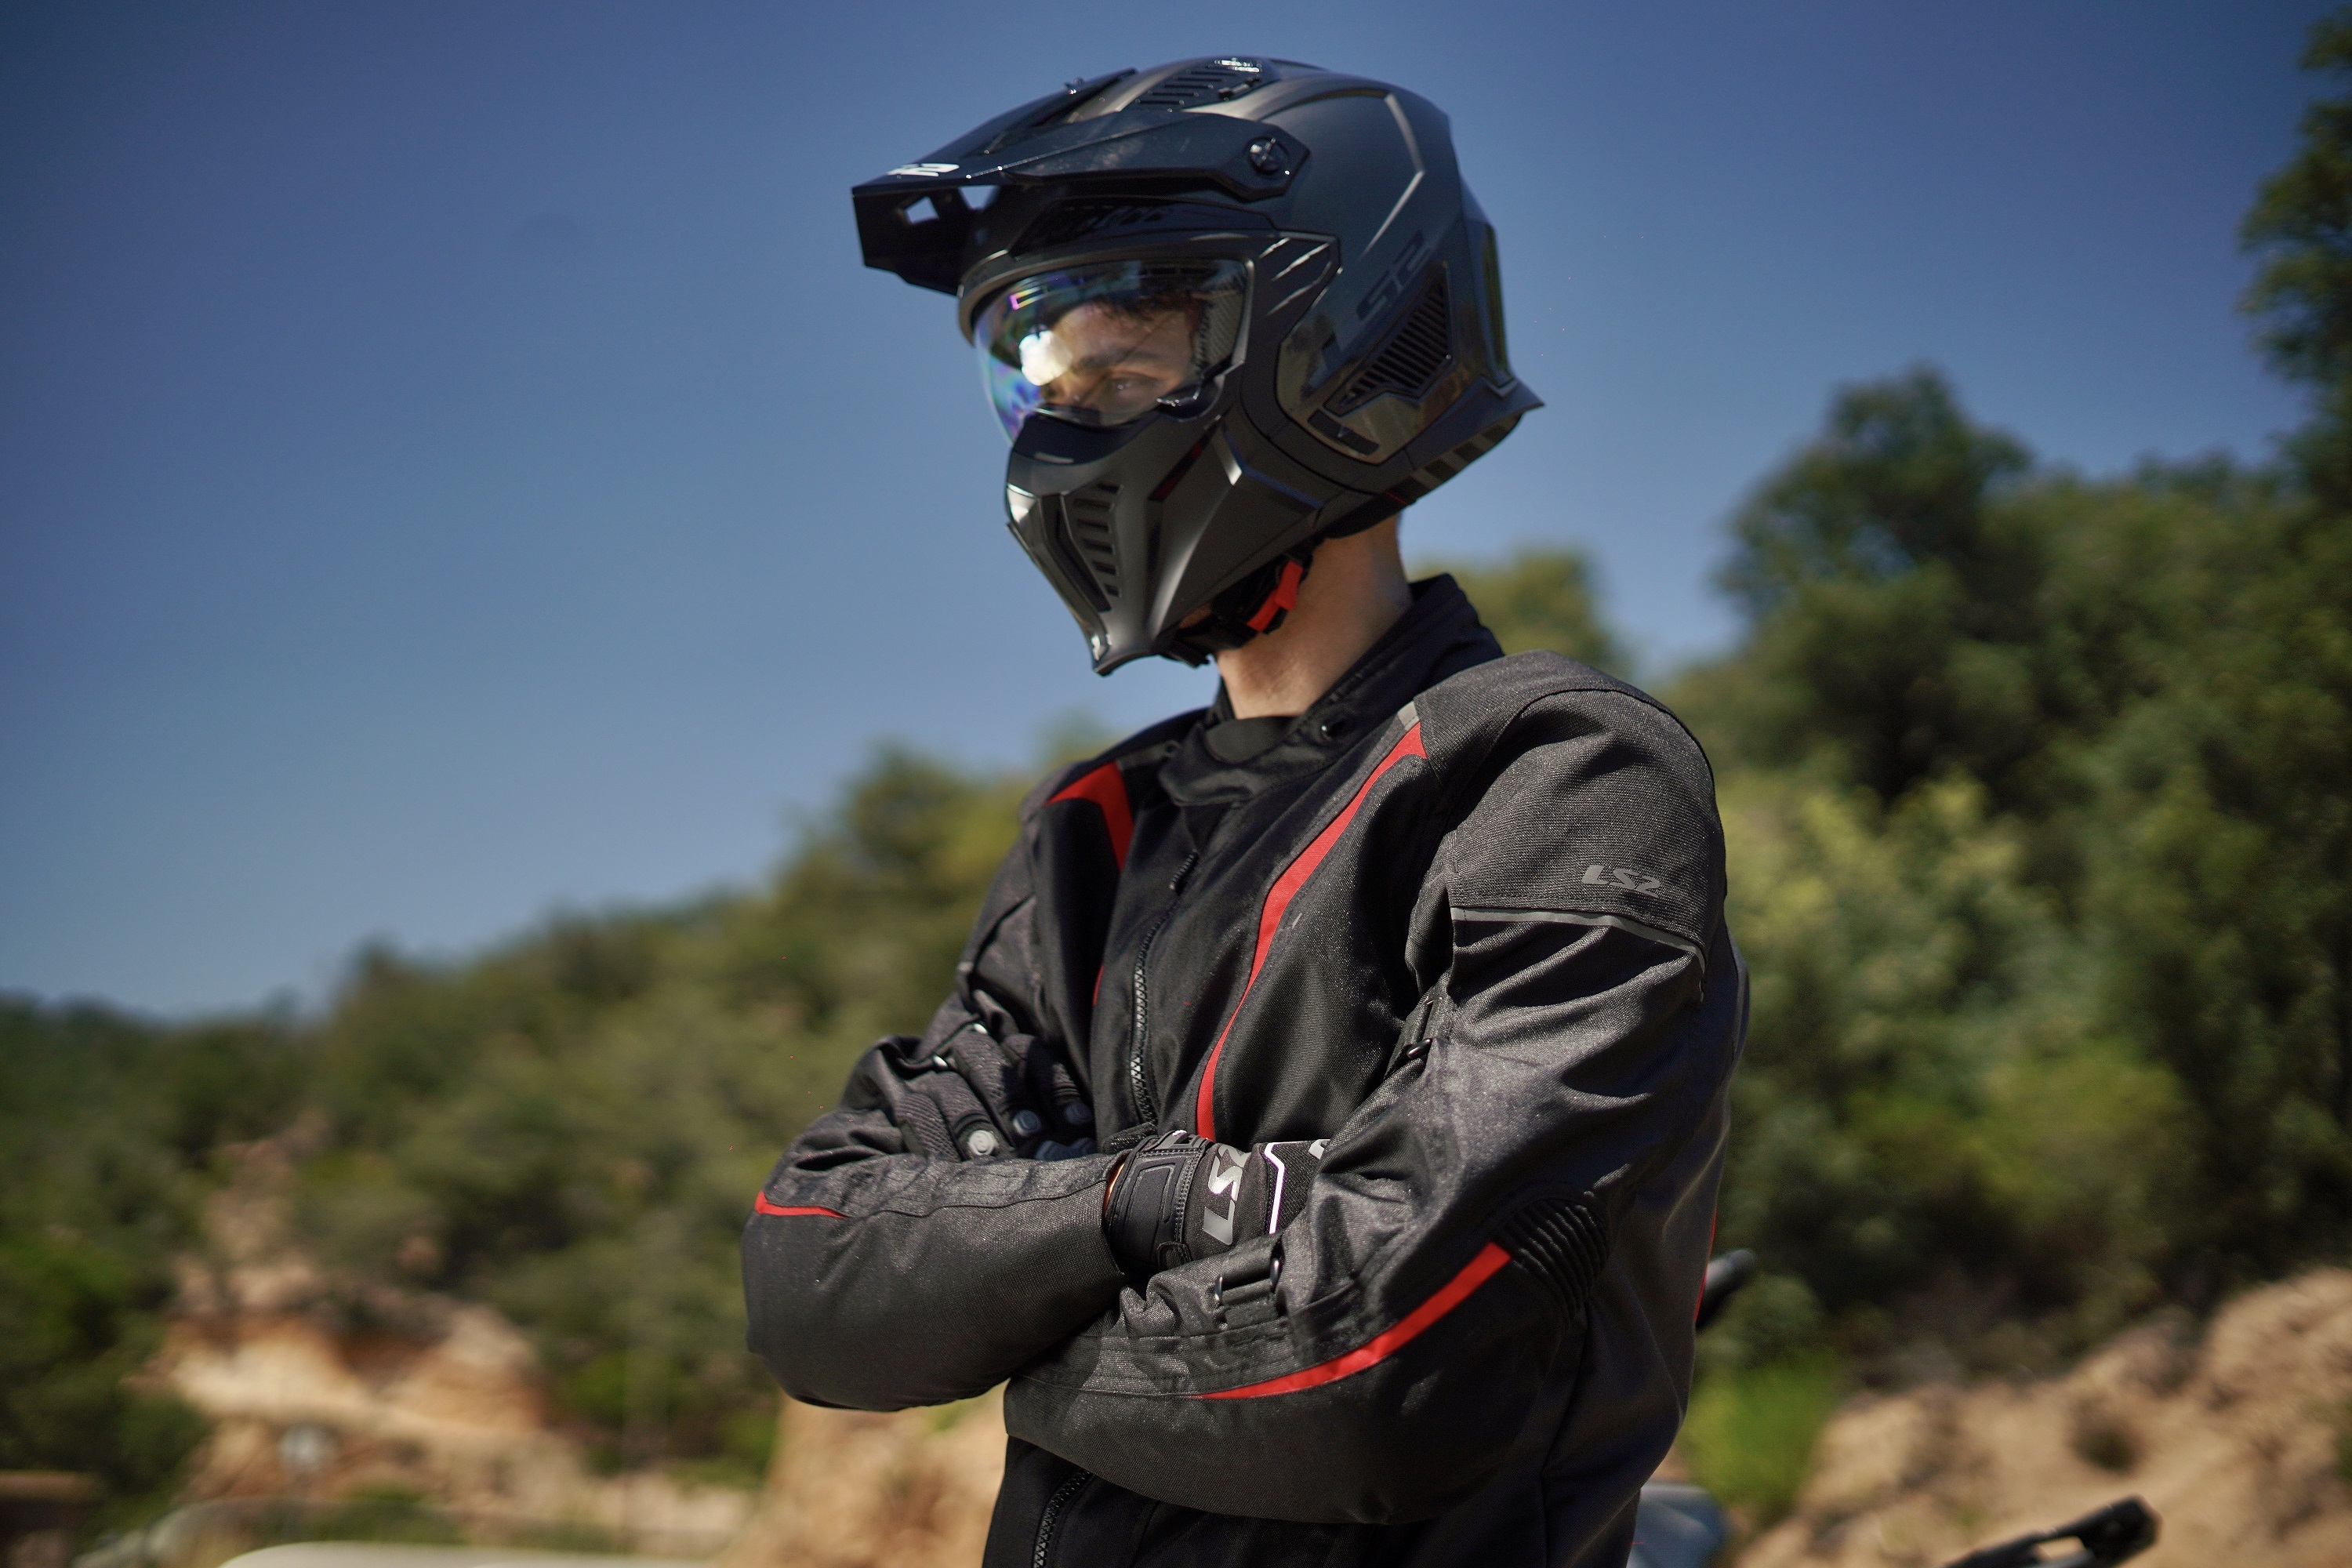 This Moto Jacket Turns Into A Backpack To Hold Your Helmet Off The